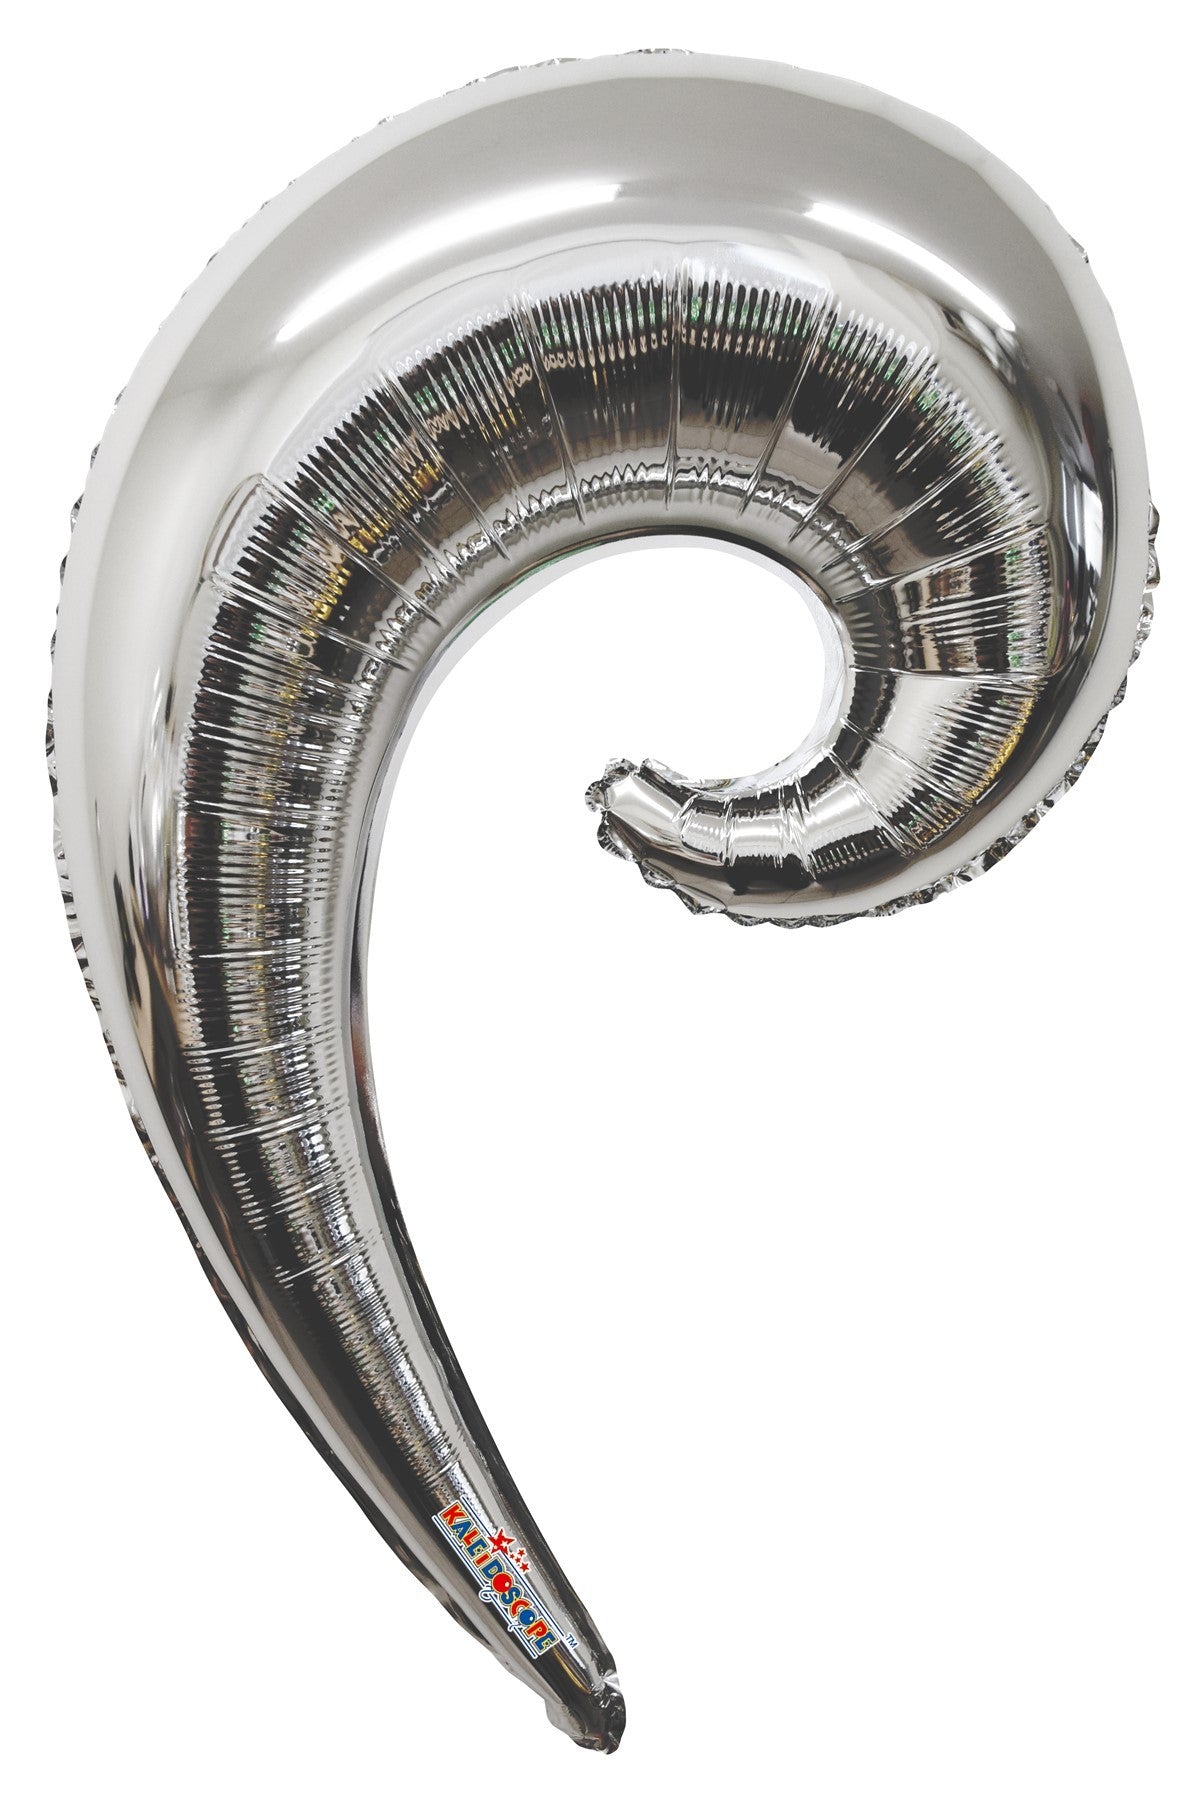 View Silver Wave Balloon 36 inch information